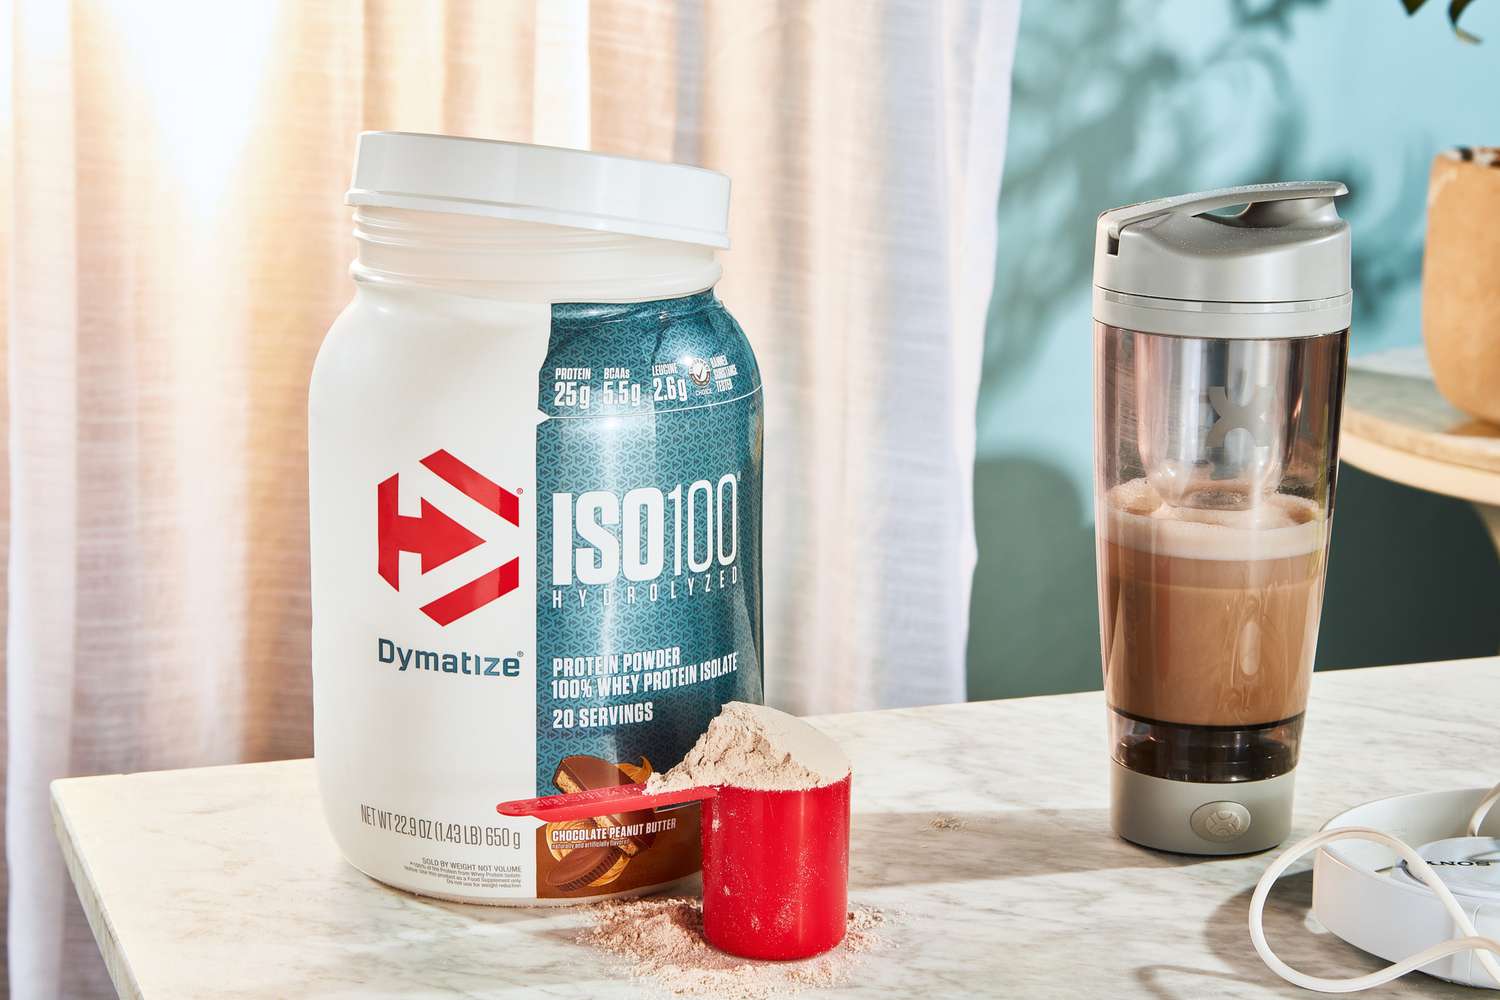 Dymatize ISO100 Whey Protein Powder in a scoop next to its container and a bottle blender